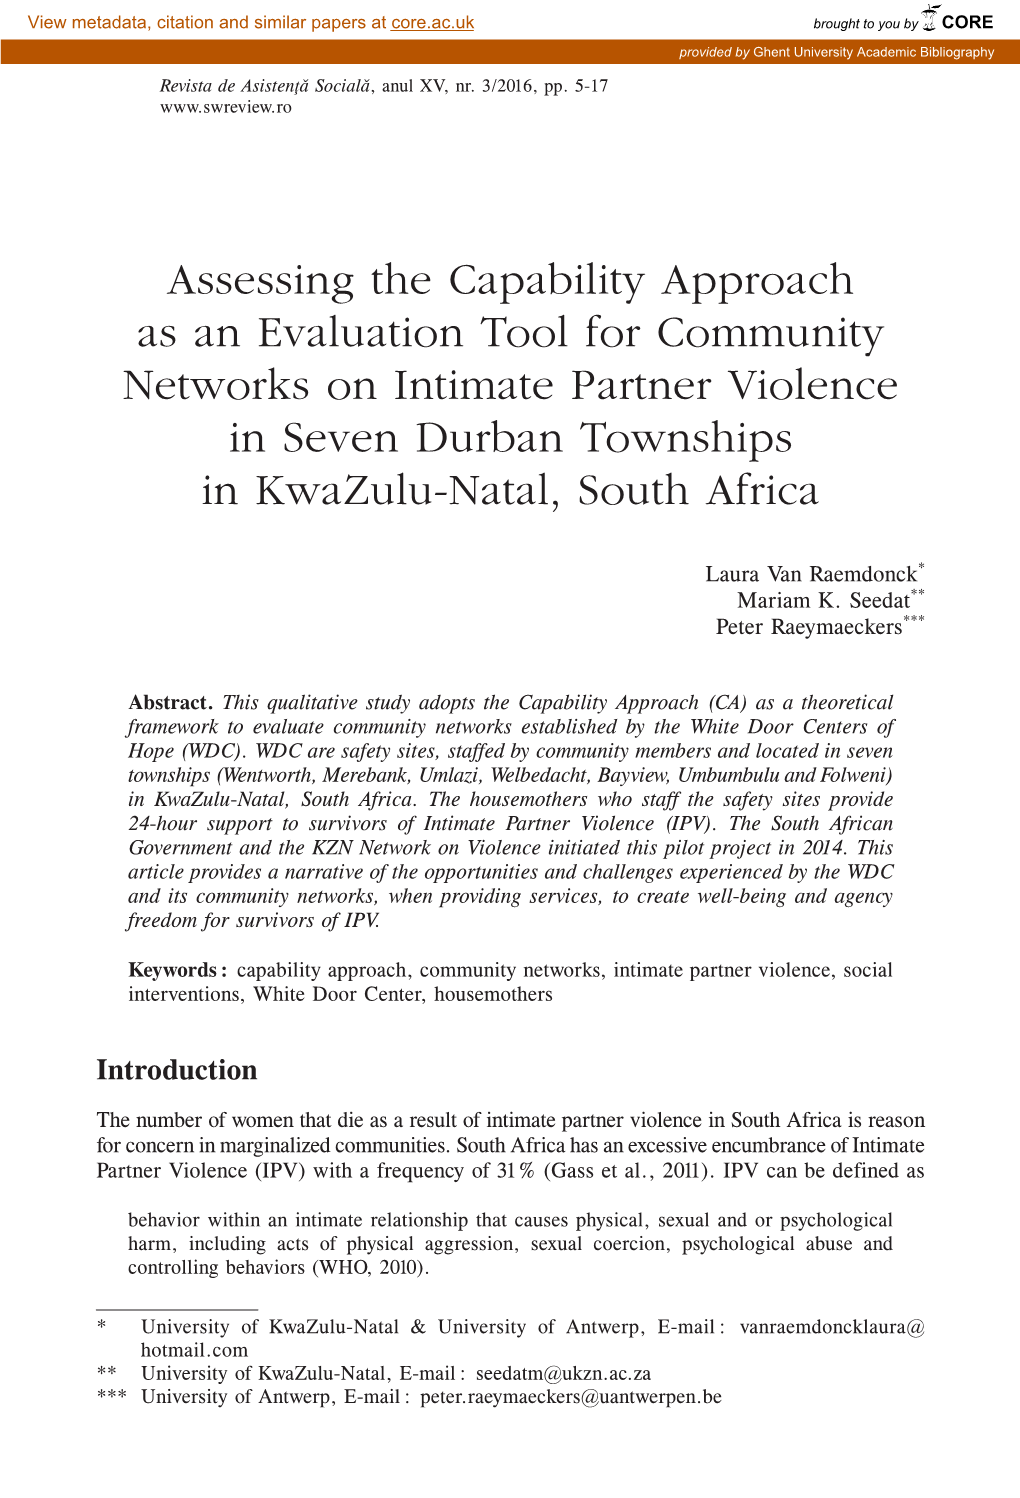 Assessing the Capability Approach As an Evaluation Tool for Community Networks on Intimate Partner Violence in Seven Durban Townships in Kwazulu‑Natal, South Africa